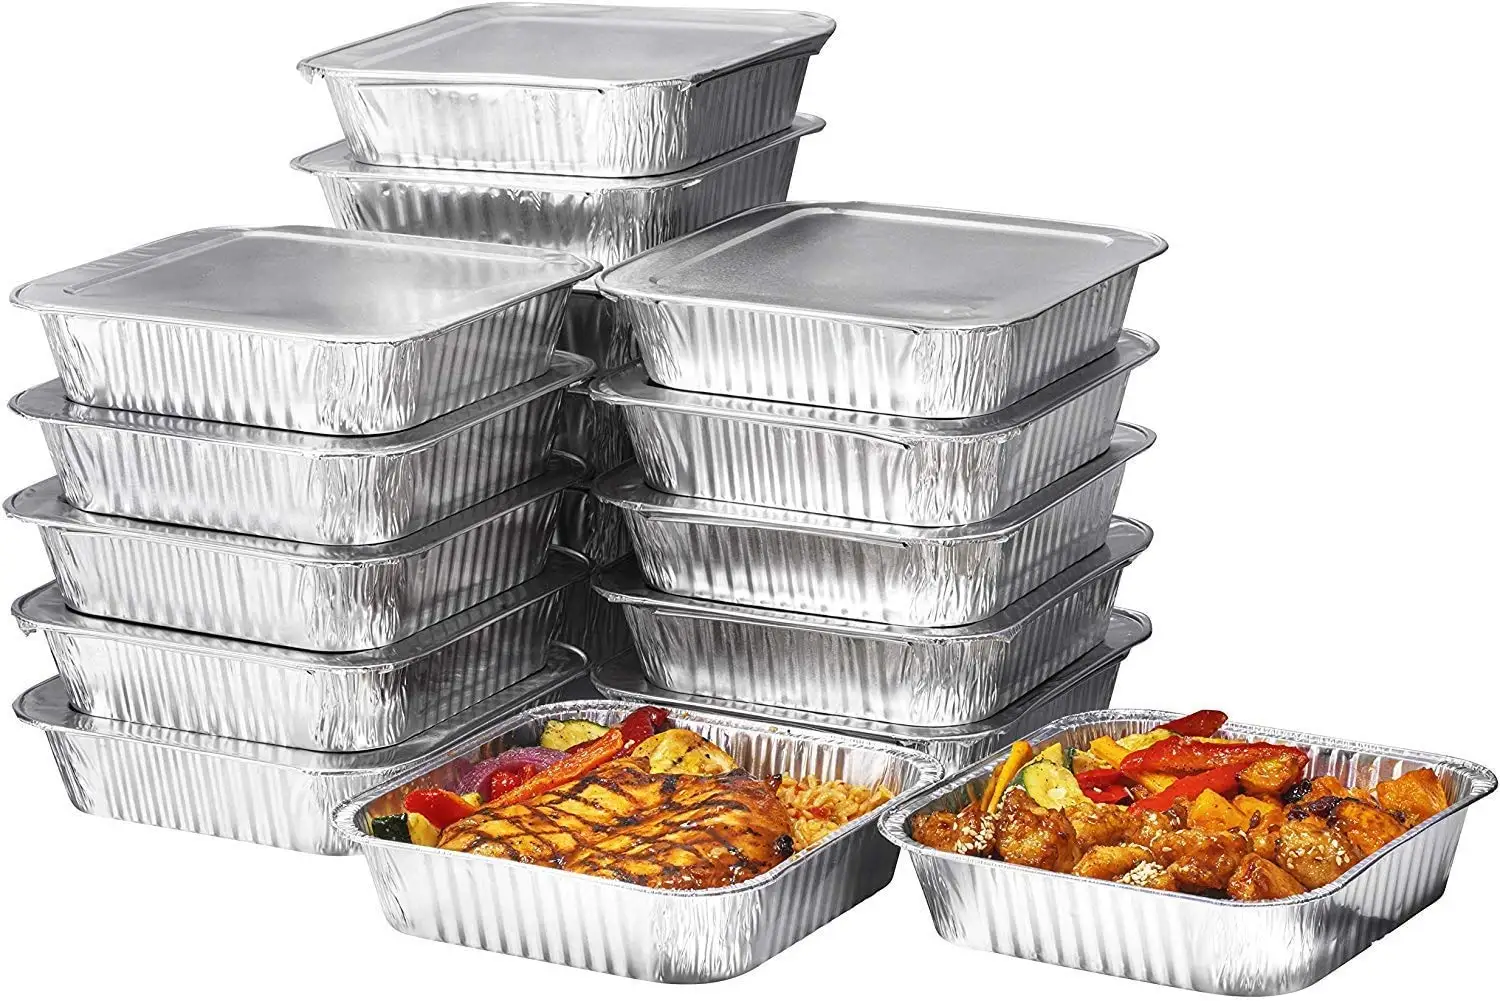 

30PCS 1350ml 8 Inch Square Aluminum Foil Tray Pans with Lids Disposable Food Packaging Containers for Baking Cooking Kitchenware